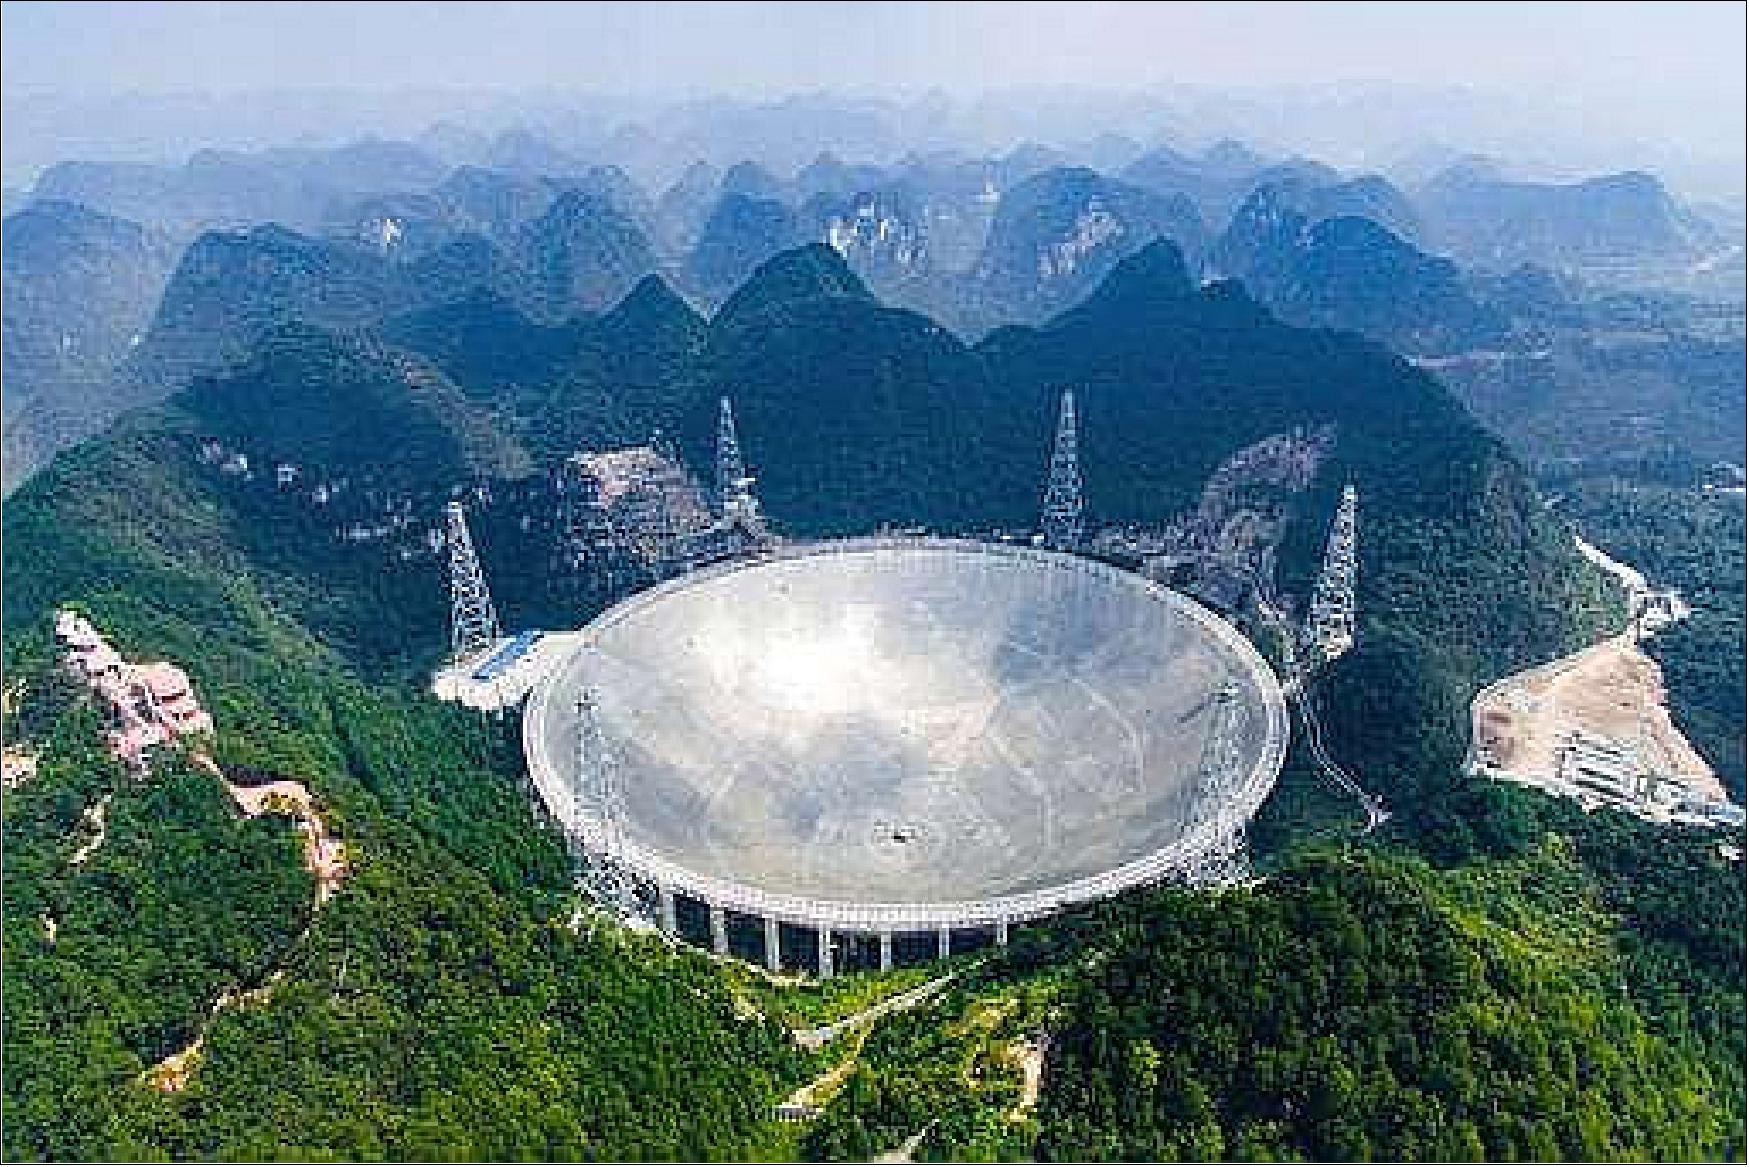 Figure 1: In this photo,released by the Xinhua News Agency on 24 Sept. 2016, an aerial view shows the Five-hundred-meter Aperture Spherical Telescope (FAST) in the remote Pingtang county in southwest China's Guizhou province (image credit: Liu Xu, Xinhua News Agency)